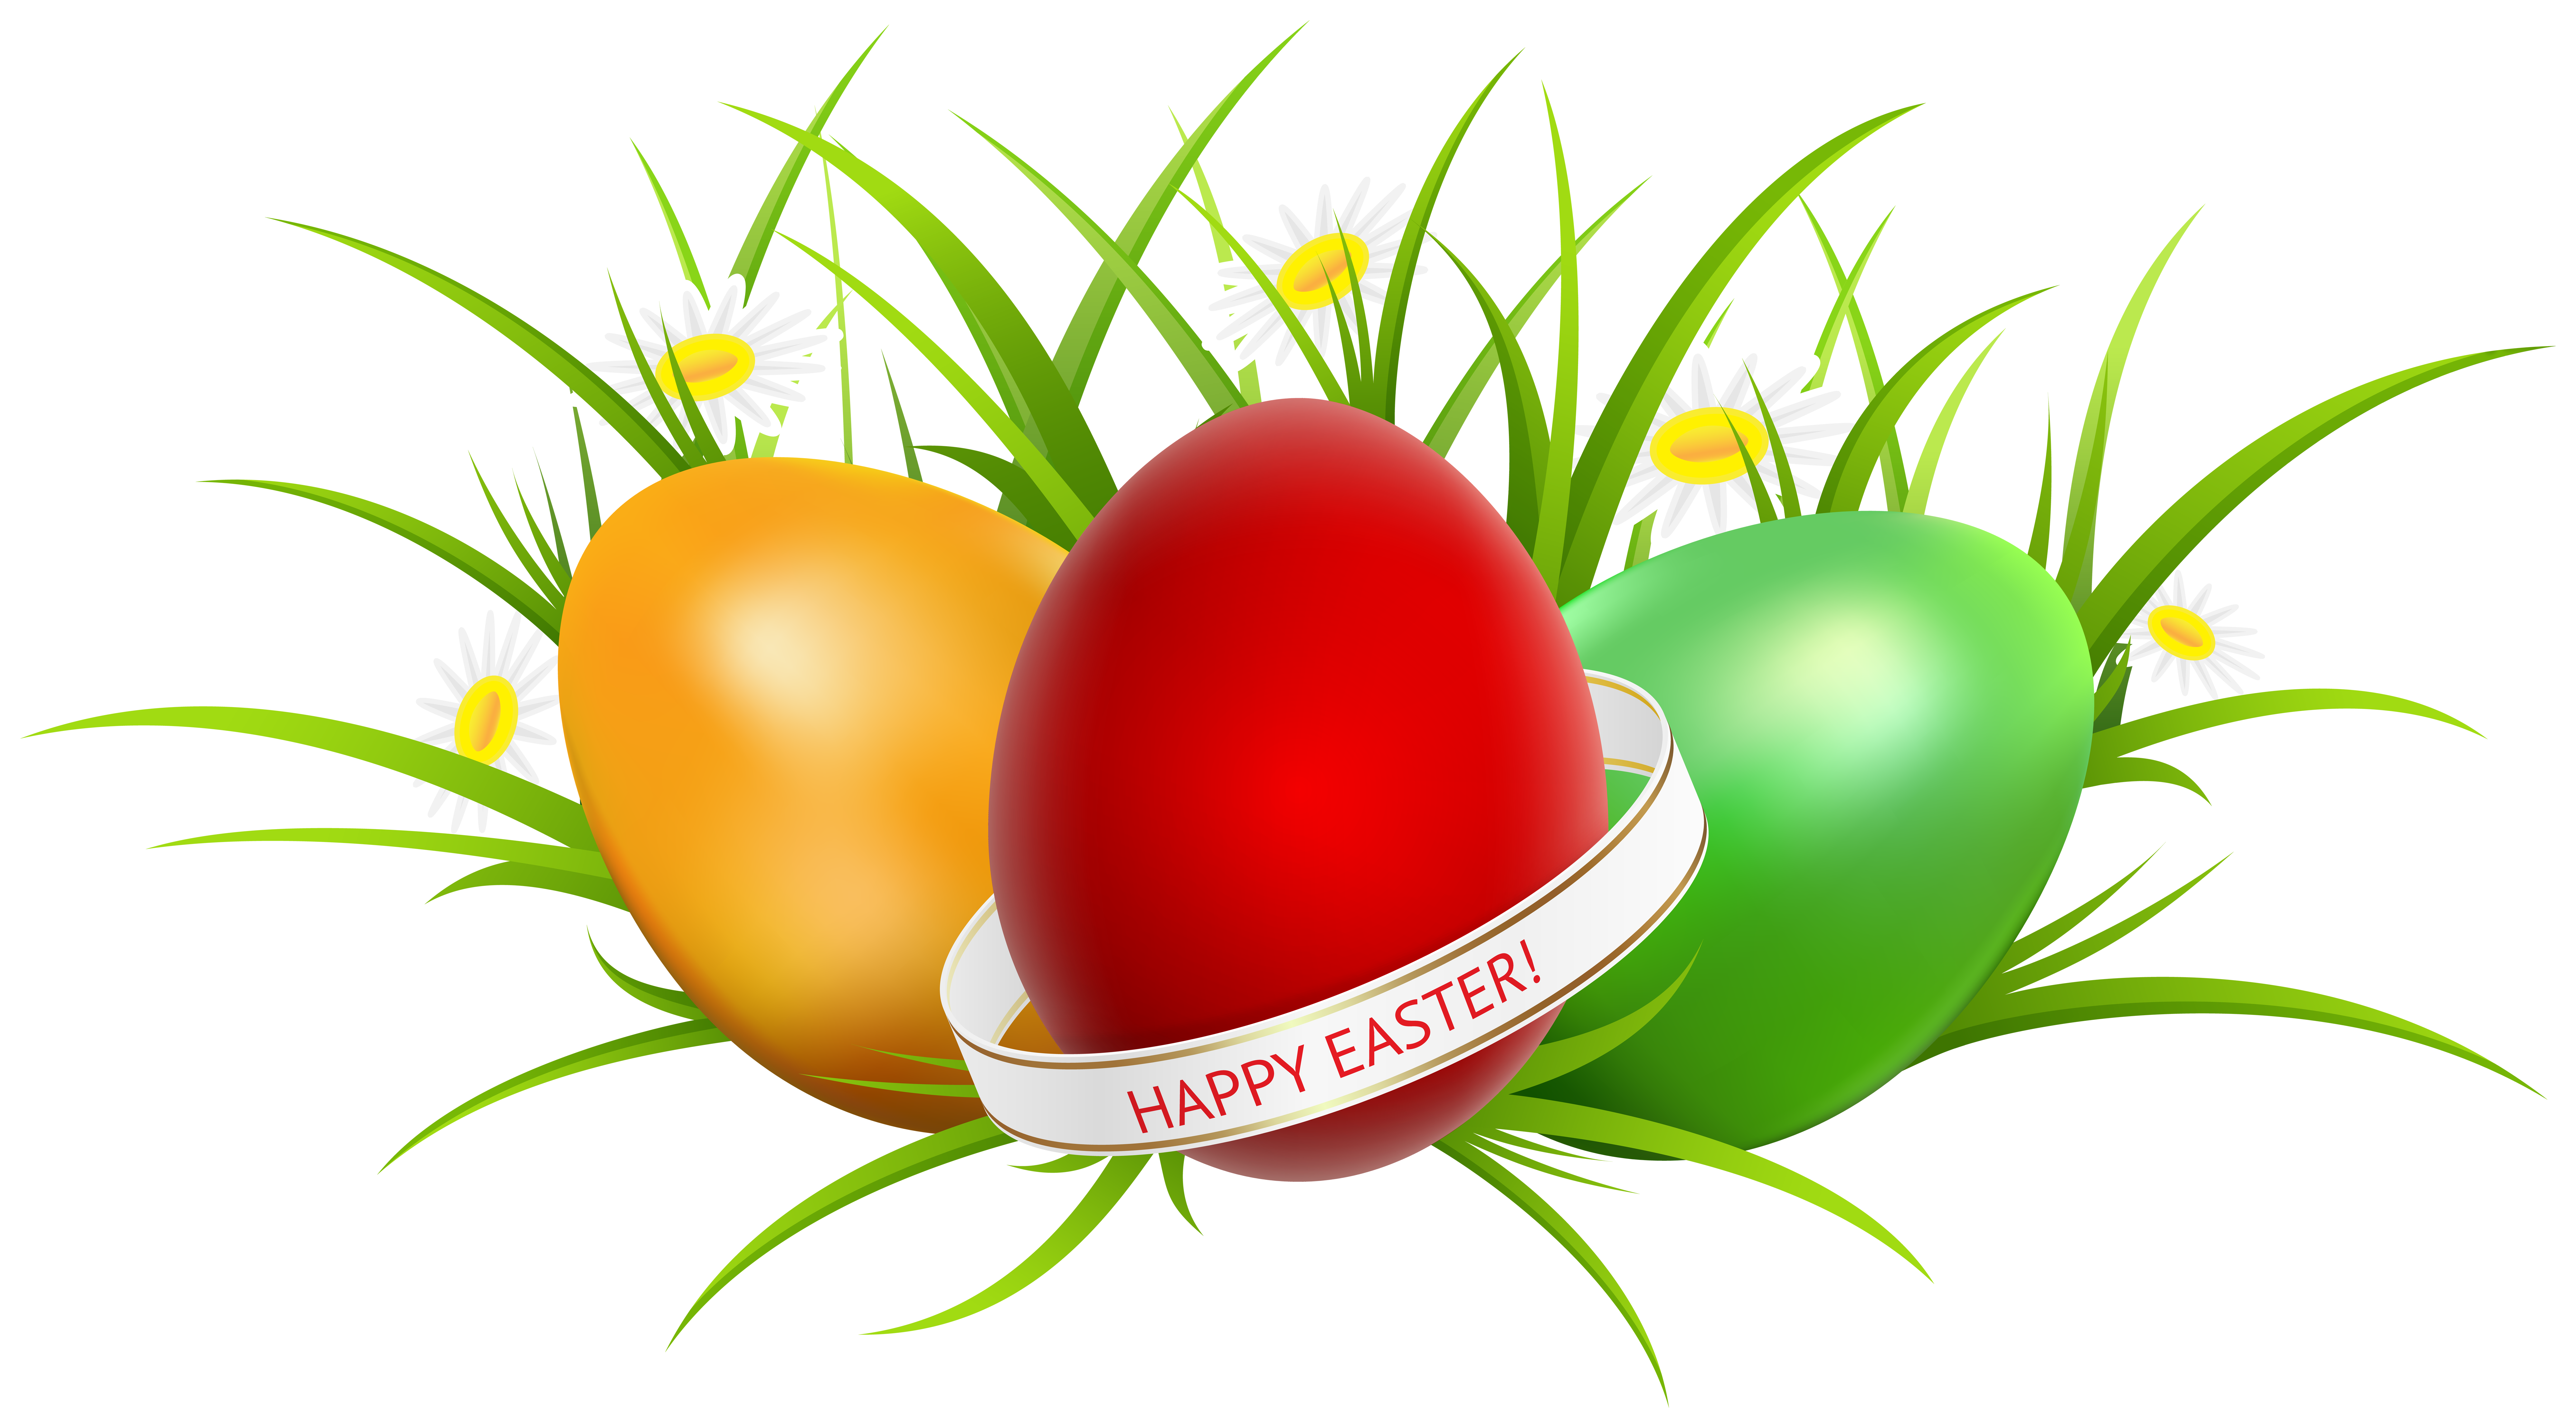 Happy Easter Eggs Transparent Image Gallery Yopriceville High Quality Images And Transparent Png Free Clipart